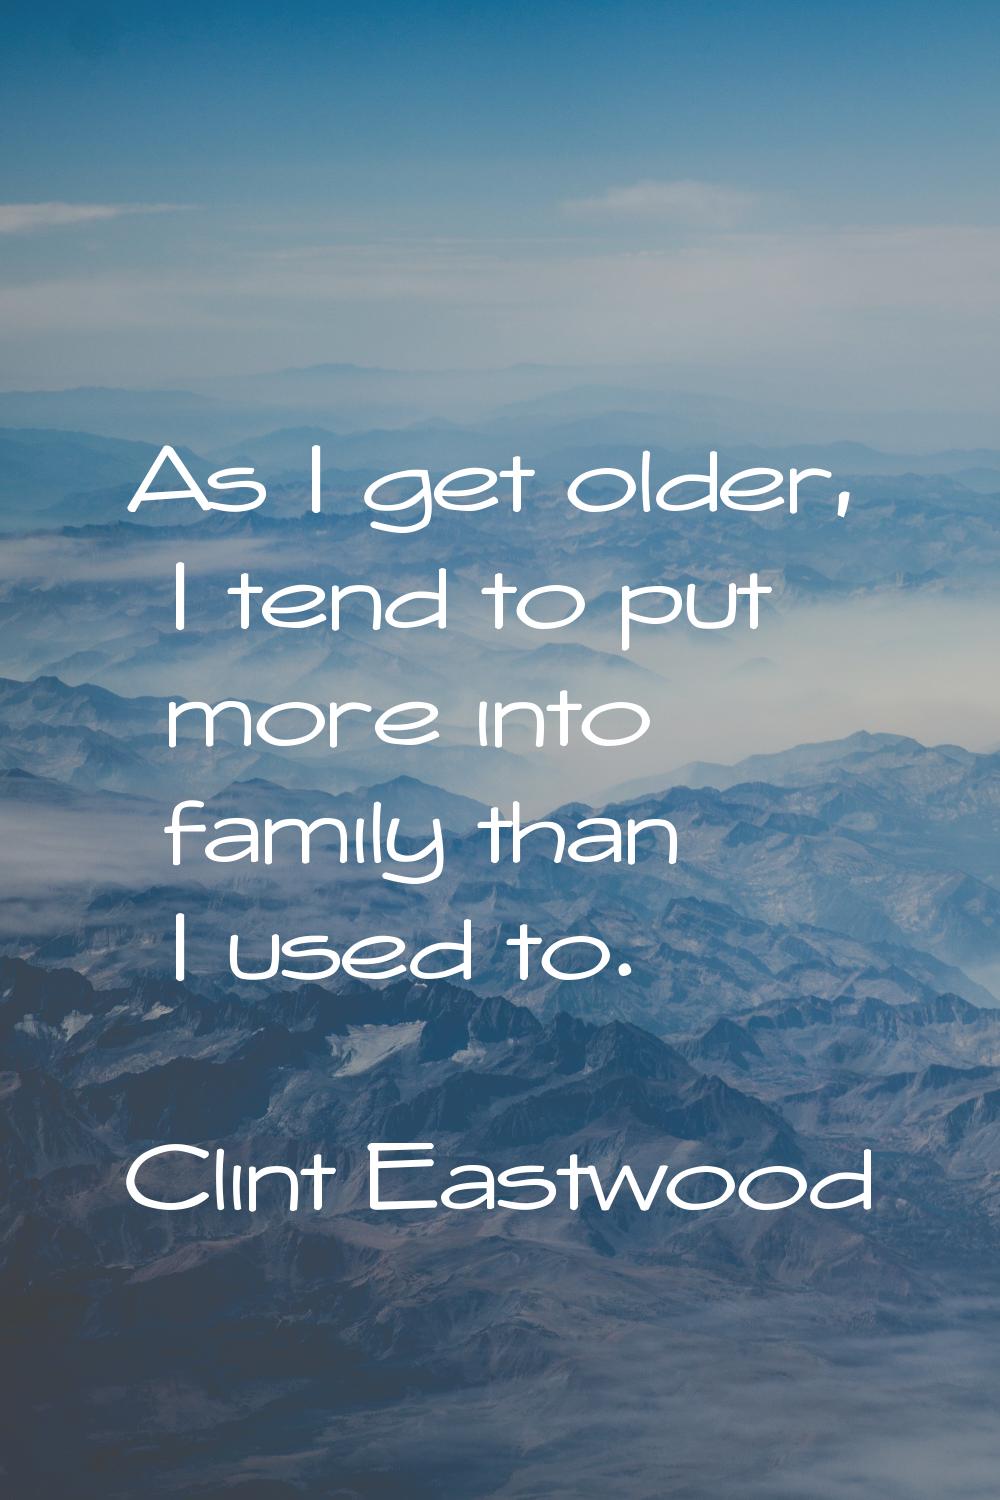 As I get older, I tend to put more into family than I used to.